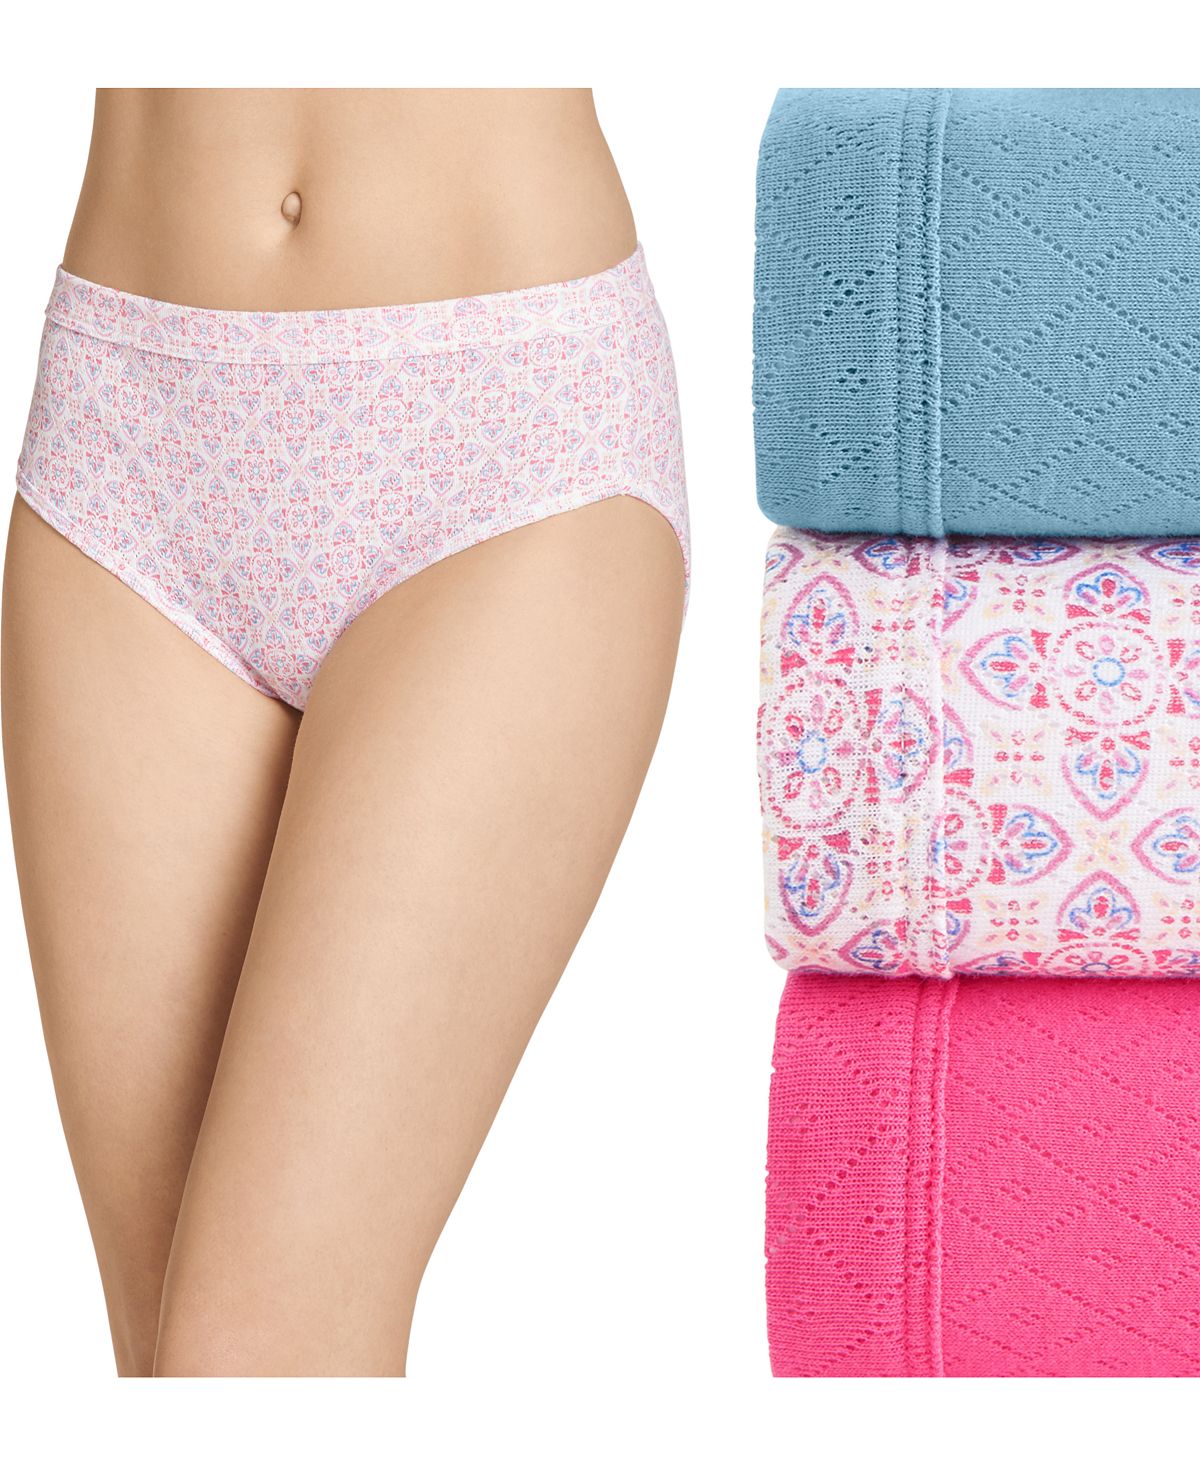 Jockey Elance Breathe Hipster Underwear 3 Pack 1540 Also Available In Extended Sizes Blue Iceburg/eyelet Geo/fruit Punch